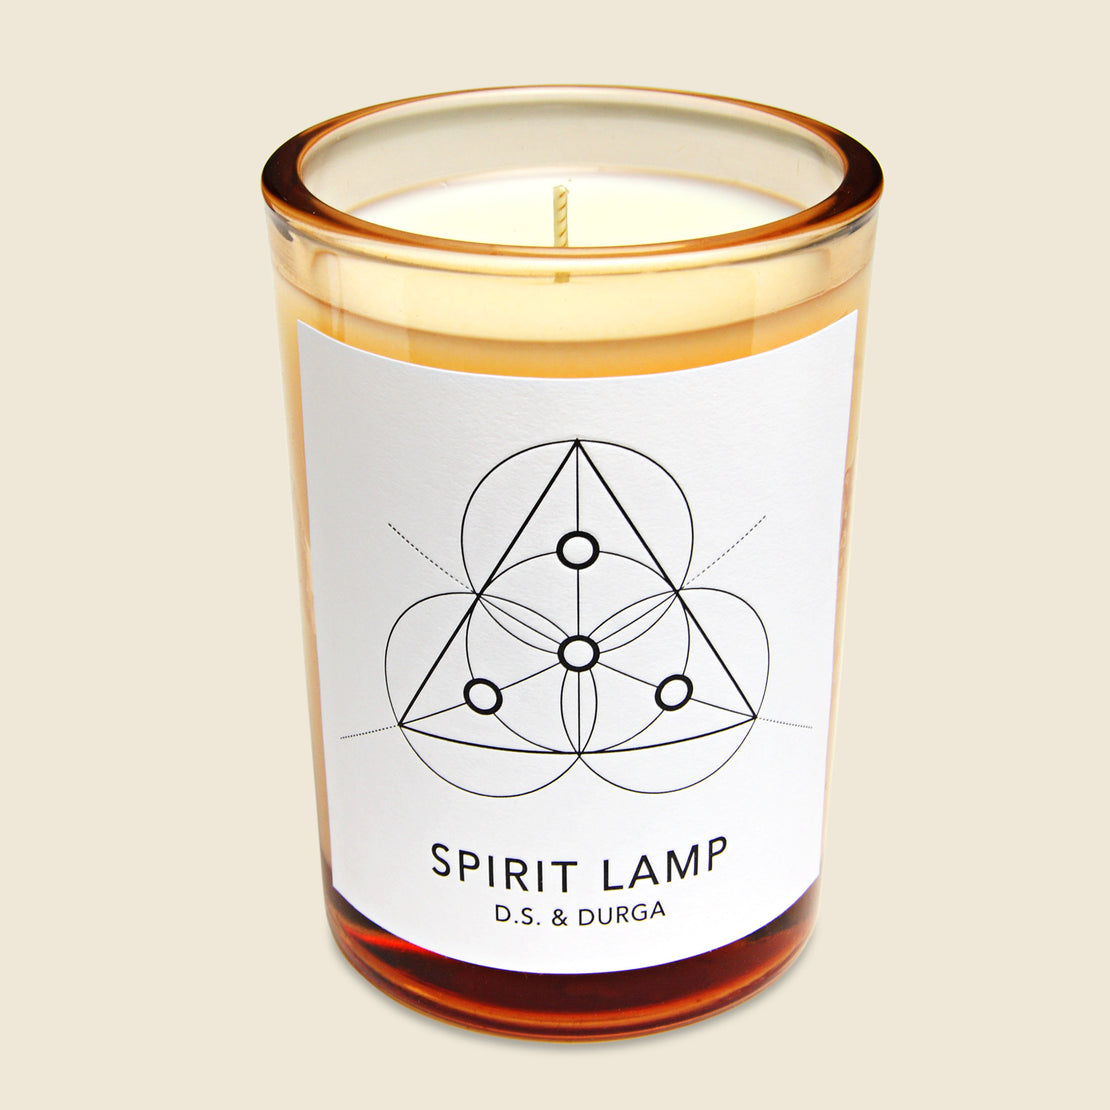 Candle - Spirit Lamp - D.S. & Durga - STAG Provisions - Gift - Candles